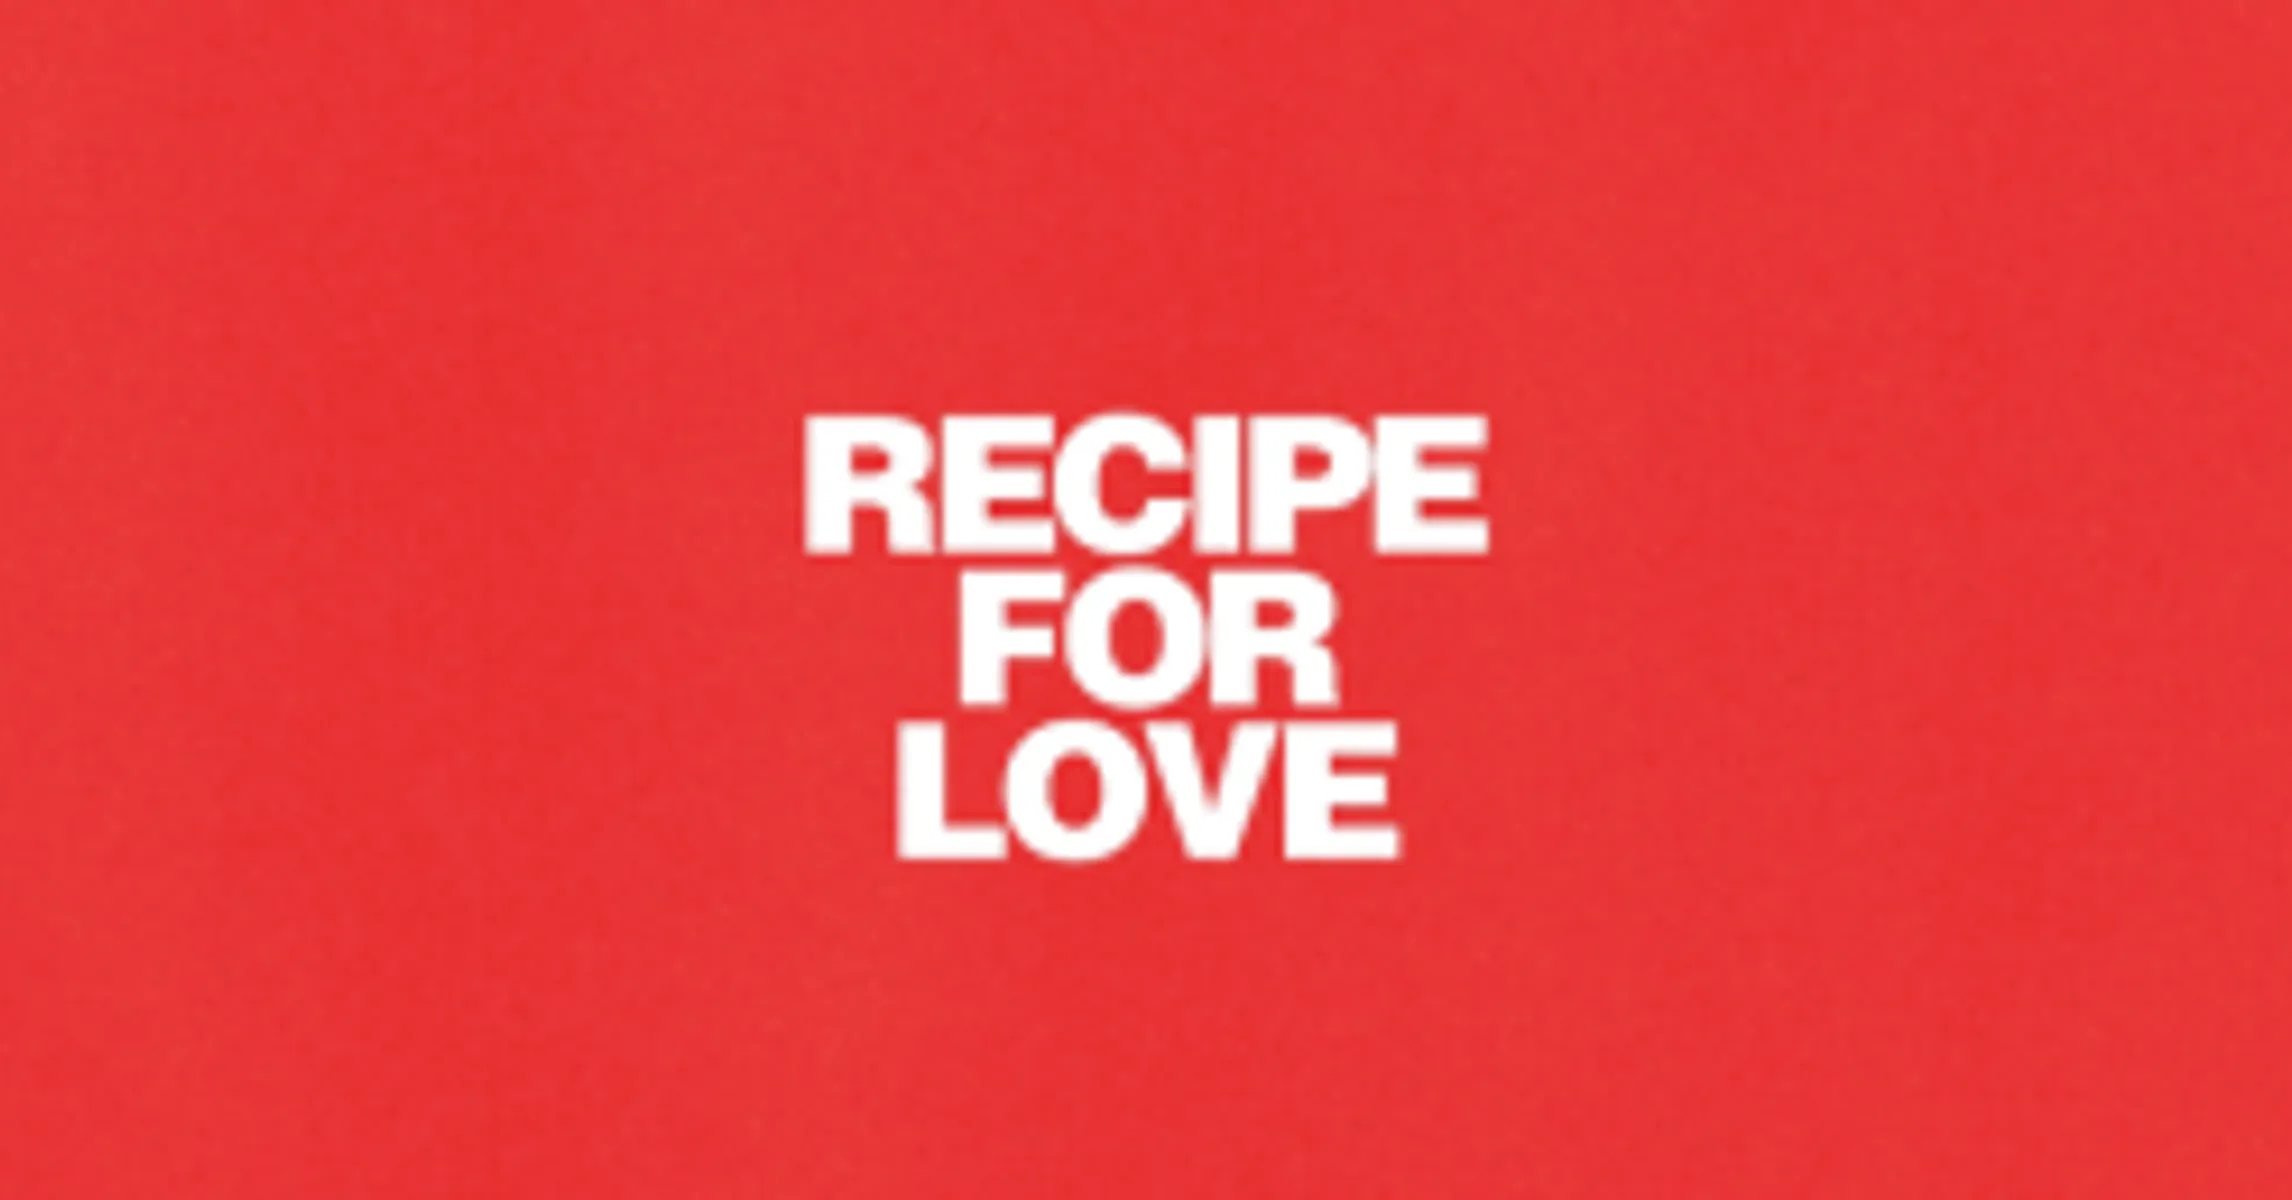 Strick & Future finally release their collaboration “RECIPE FOR LOVE”